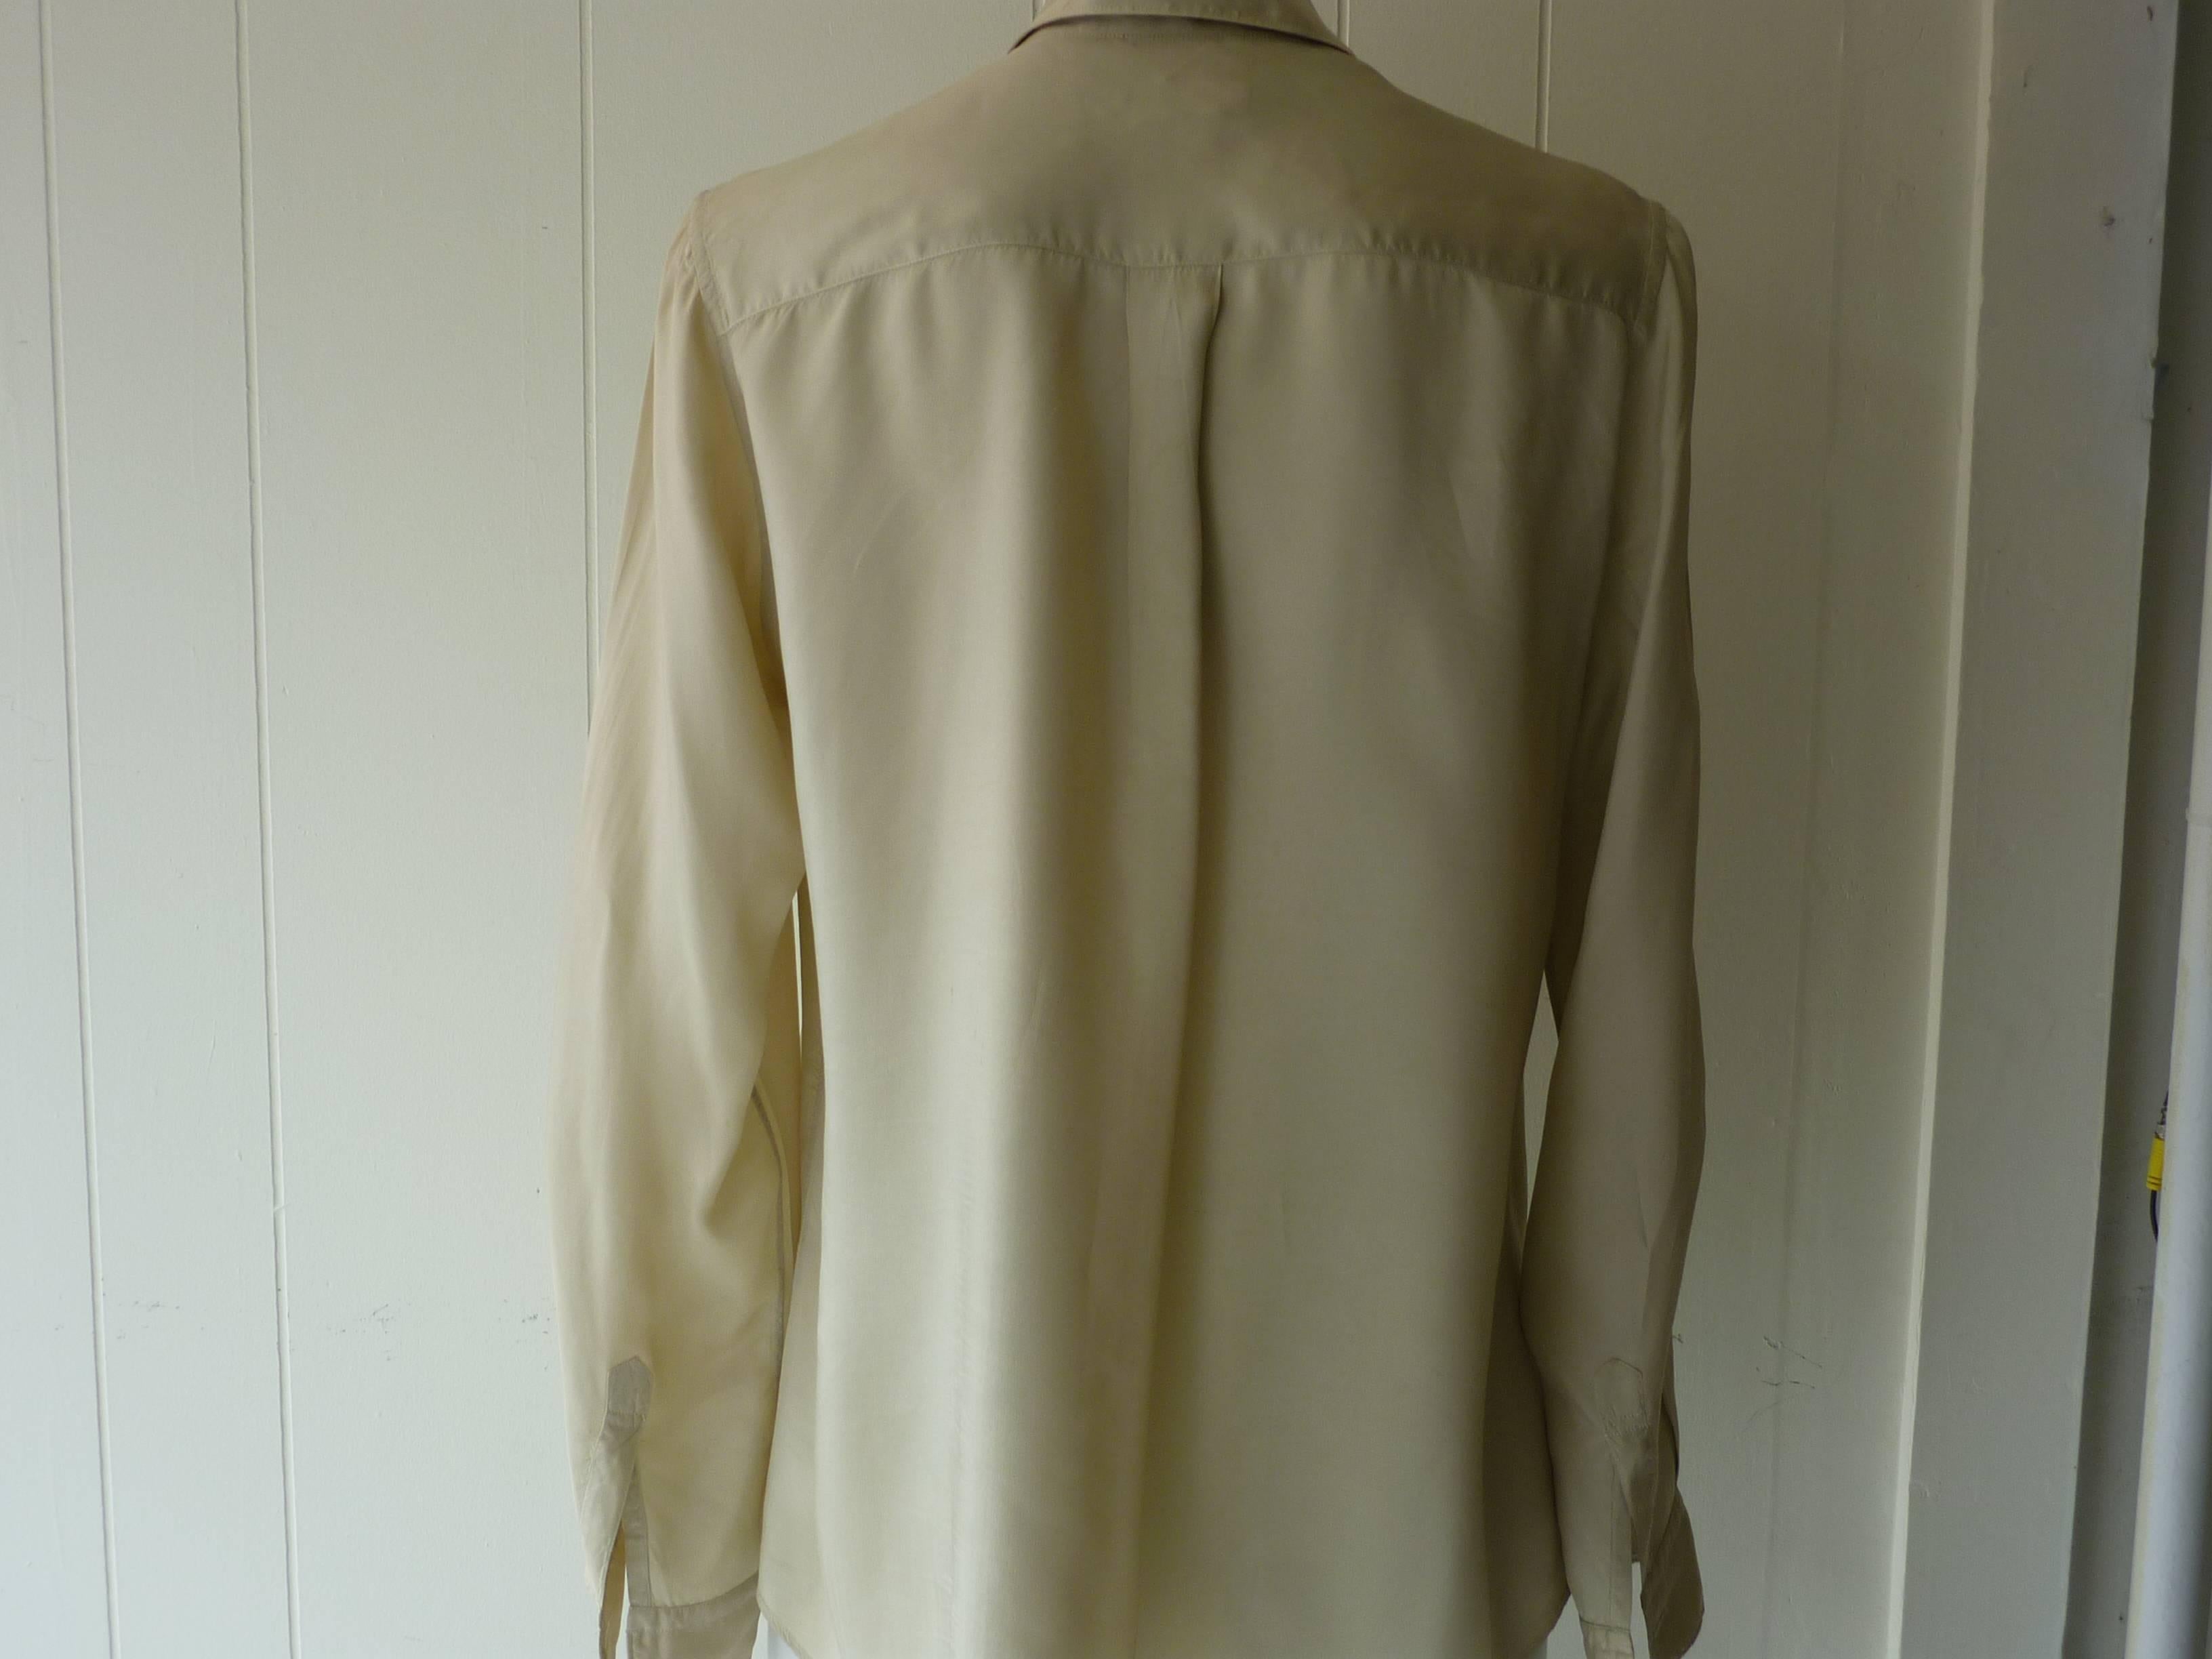 Made in Italy of light beige rayon, this shirt has a sheen; a breat pocket and a middle pleat at the back.

There are some light spots on the sleeve which is why I have marked it fair.
